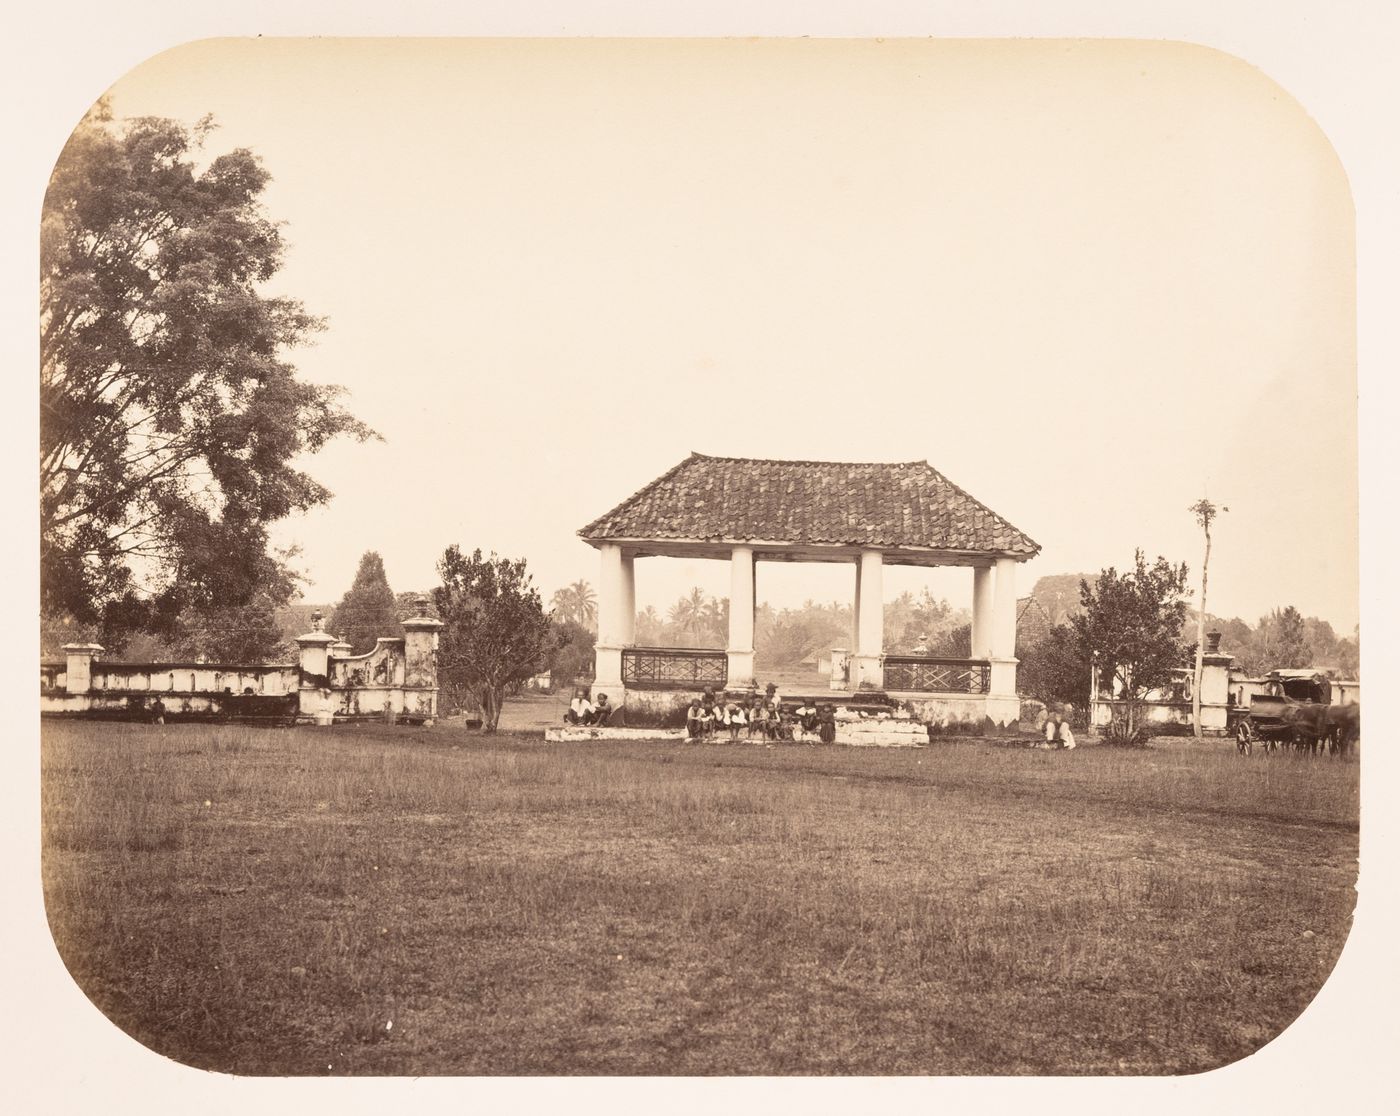 View of a pavilion-like building, walls and people, Tjiandjur (now Cianjur), Dutch East Indies (now Indonesia)